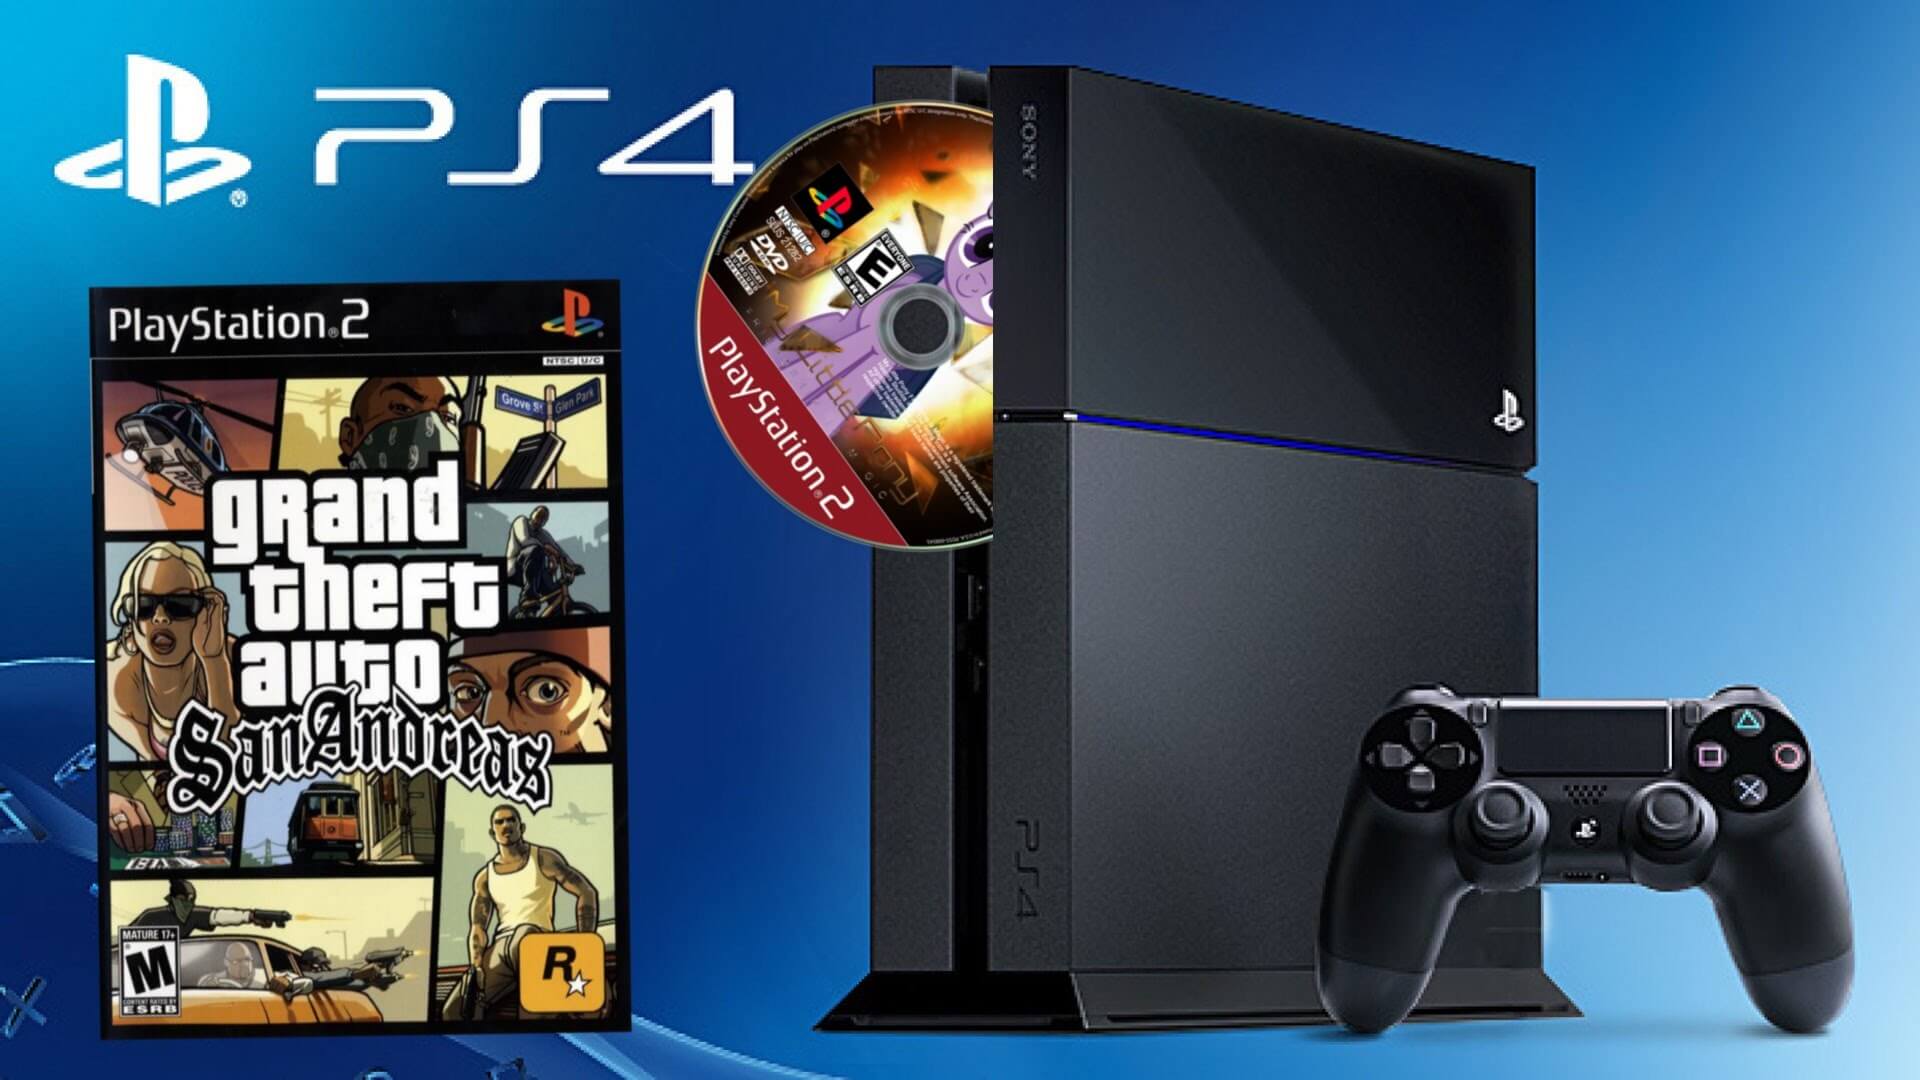 Sony PLAYSTATION 4 игры. Sony PLAYSTATION 4 диски. Диск плейстейшен 4 PS 5. PS ps2 ps3 ps4 PS 5. Перенести игру с ps4 на ps4